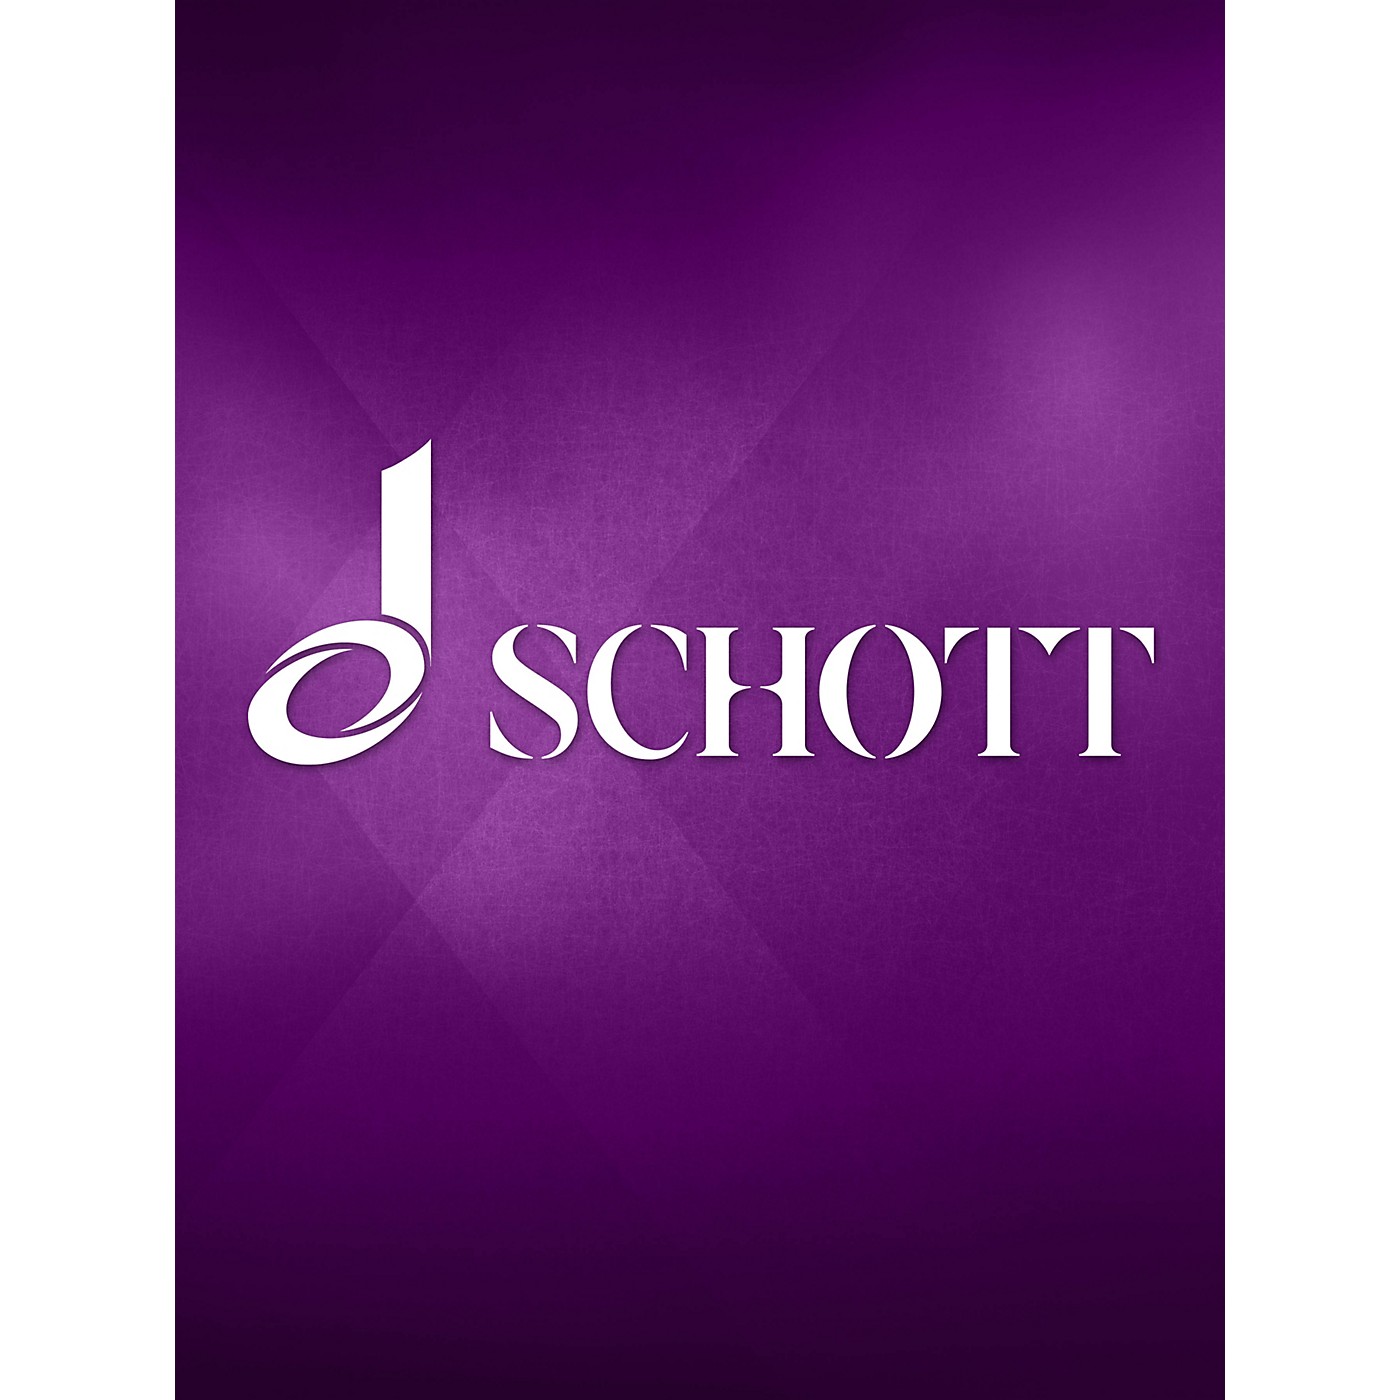 Schott Music Duo in E-flat Major, Krebs 218 (for Viola and Violoncello) Schott Series by Karl Ditters von Dittersdorf thumbnail